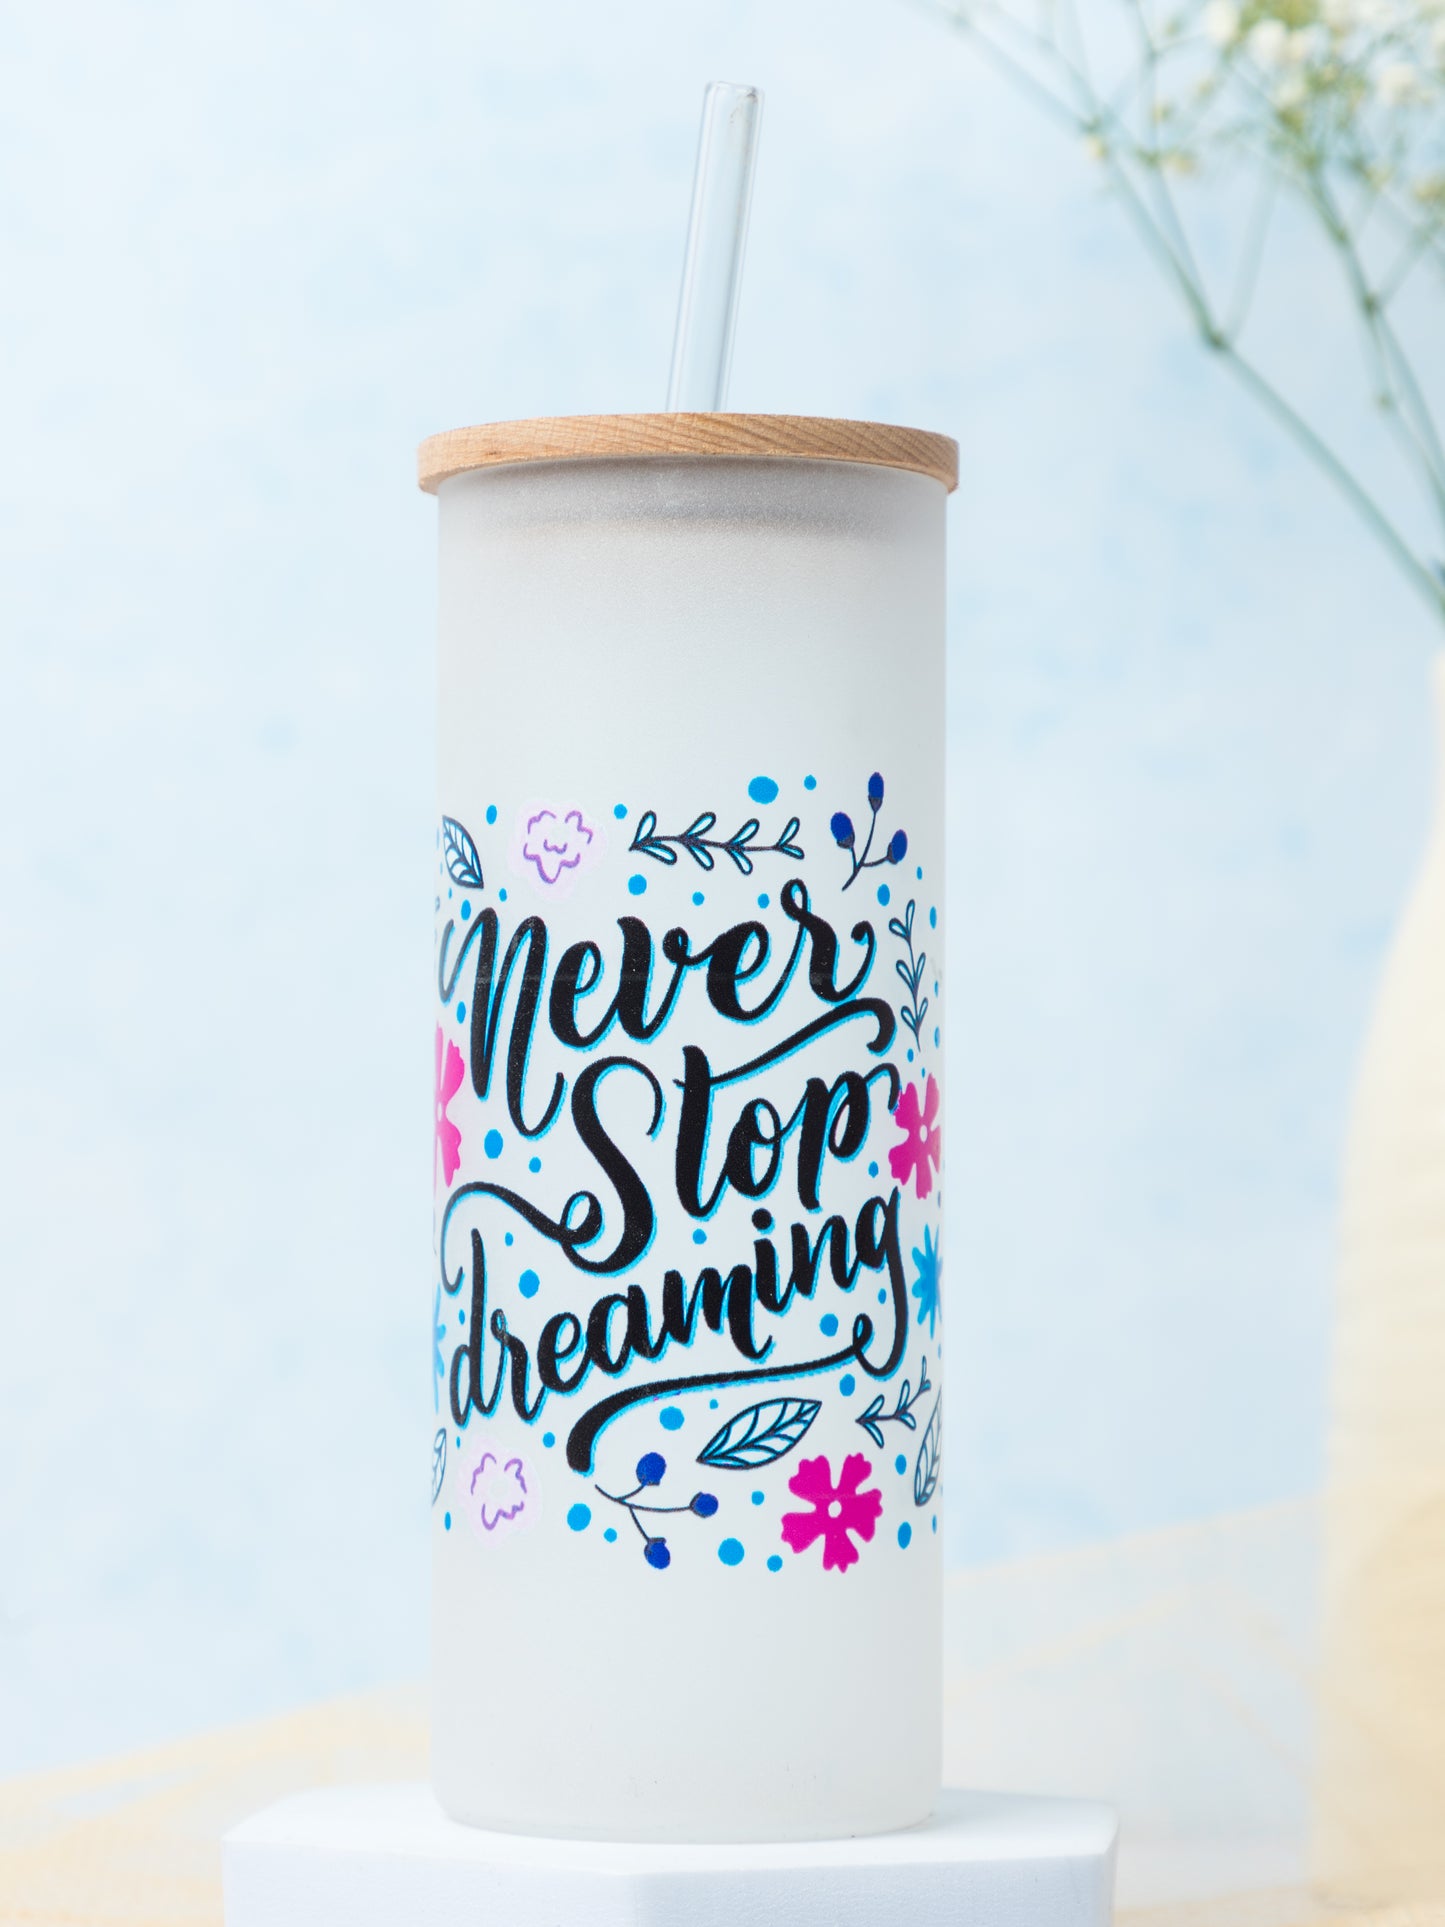 Frosted Grande Sipper 650ml| Never Stop Dreaming Print| 20oz Tall Tumbler with straw and lid